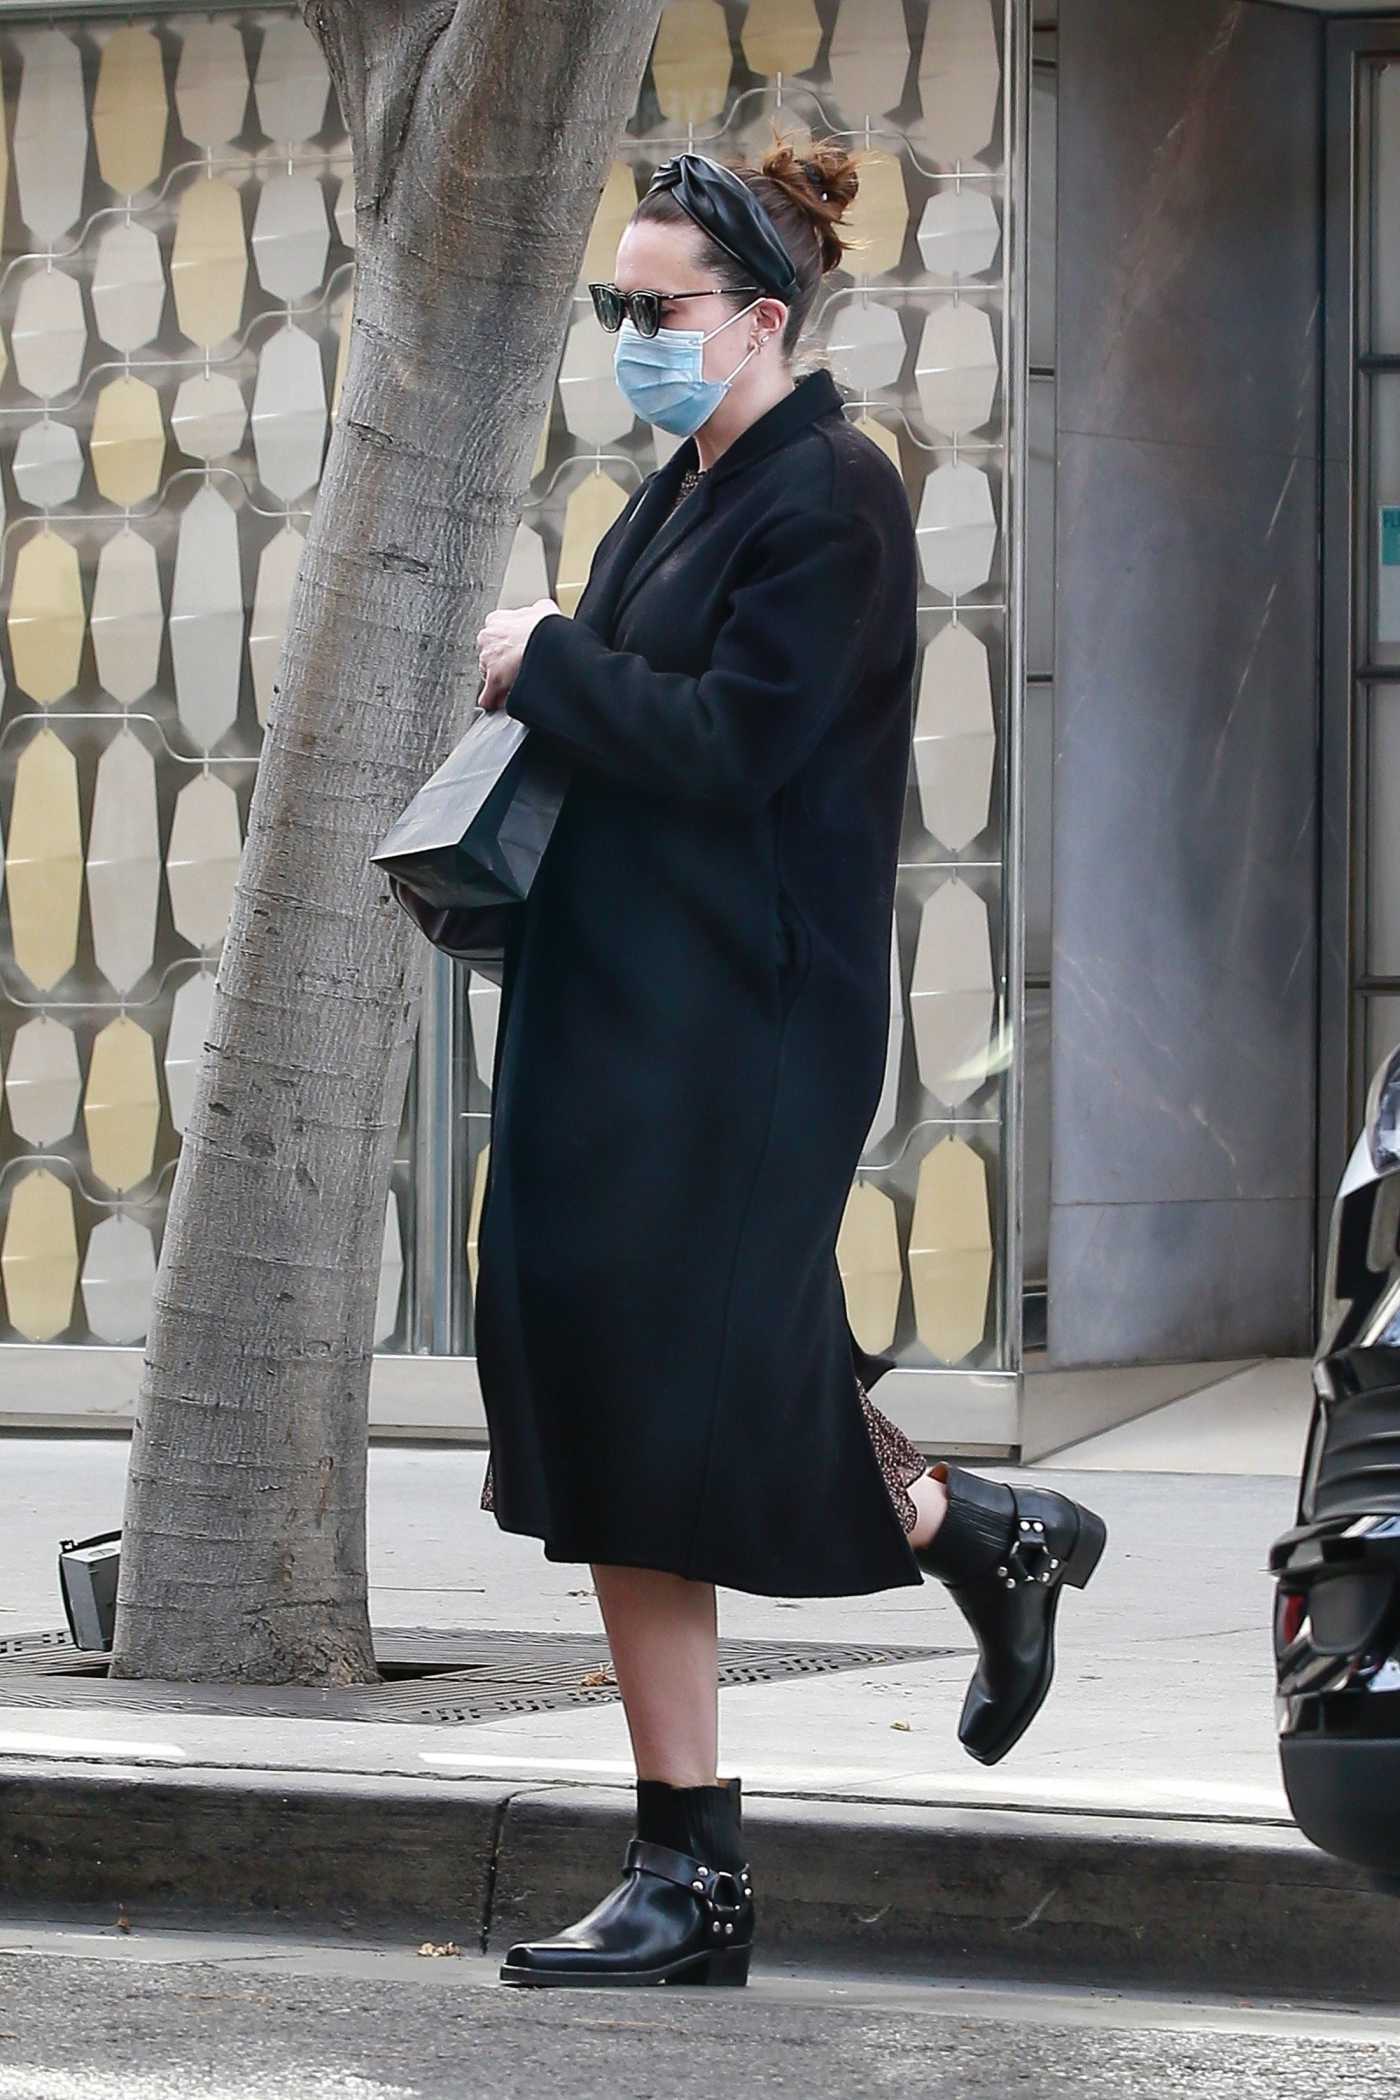 Mandy Moore in a Black Coat Shops on Rodeo Drive in Beverly Hills 01/31/2021